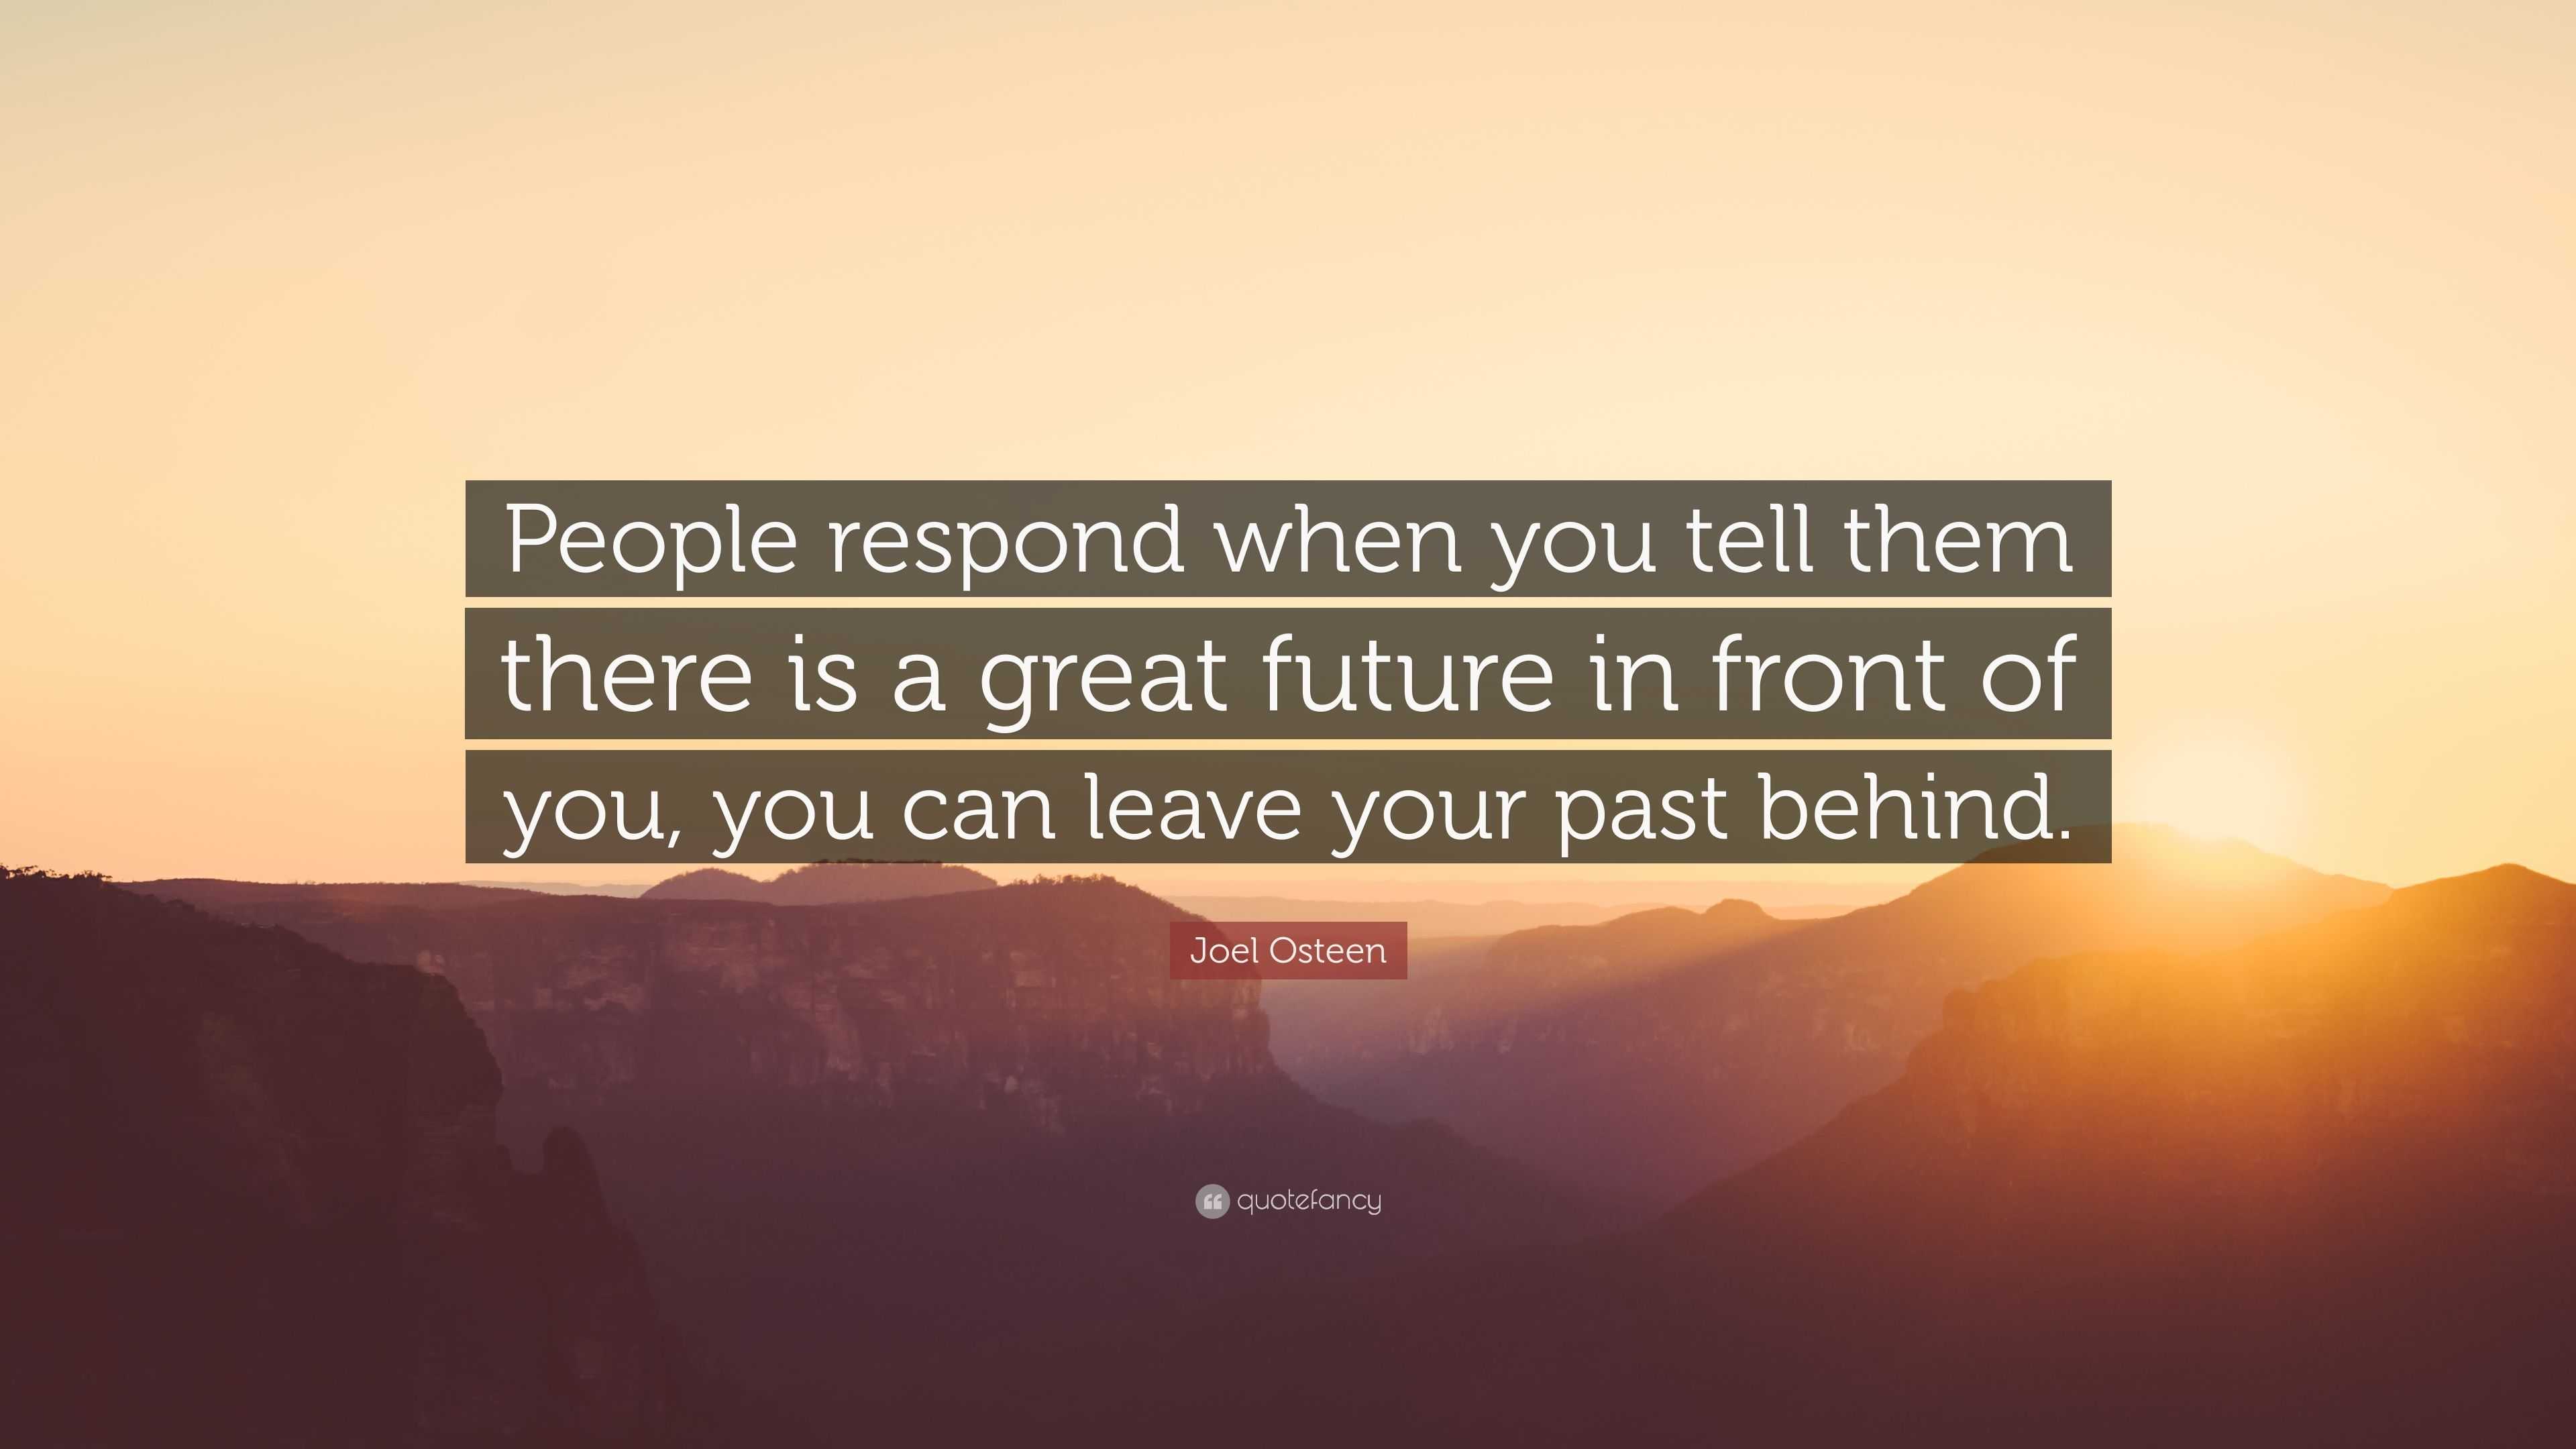 Joel Osteen Quote “People respond when you tell them